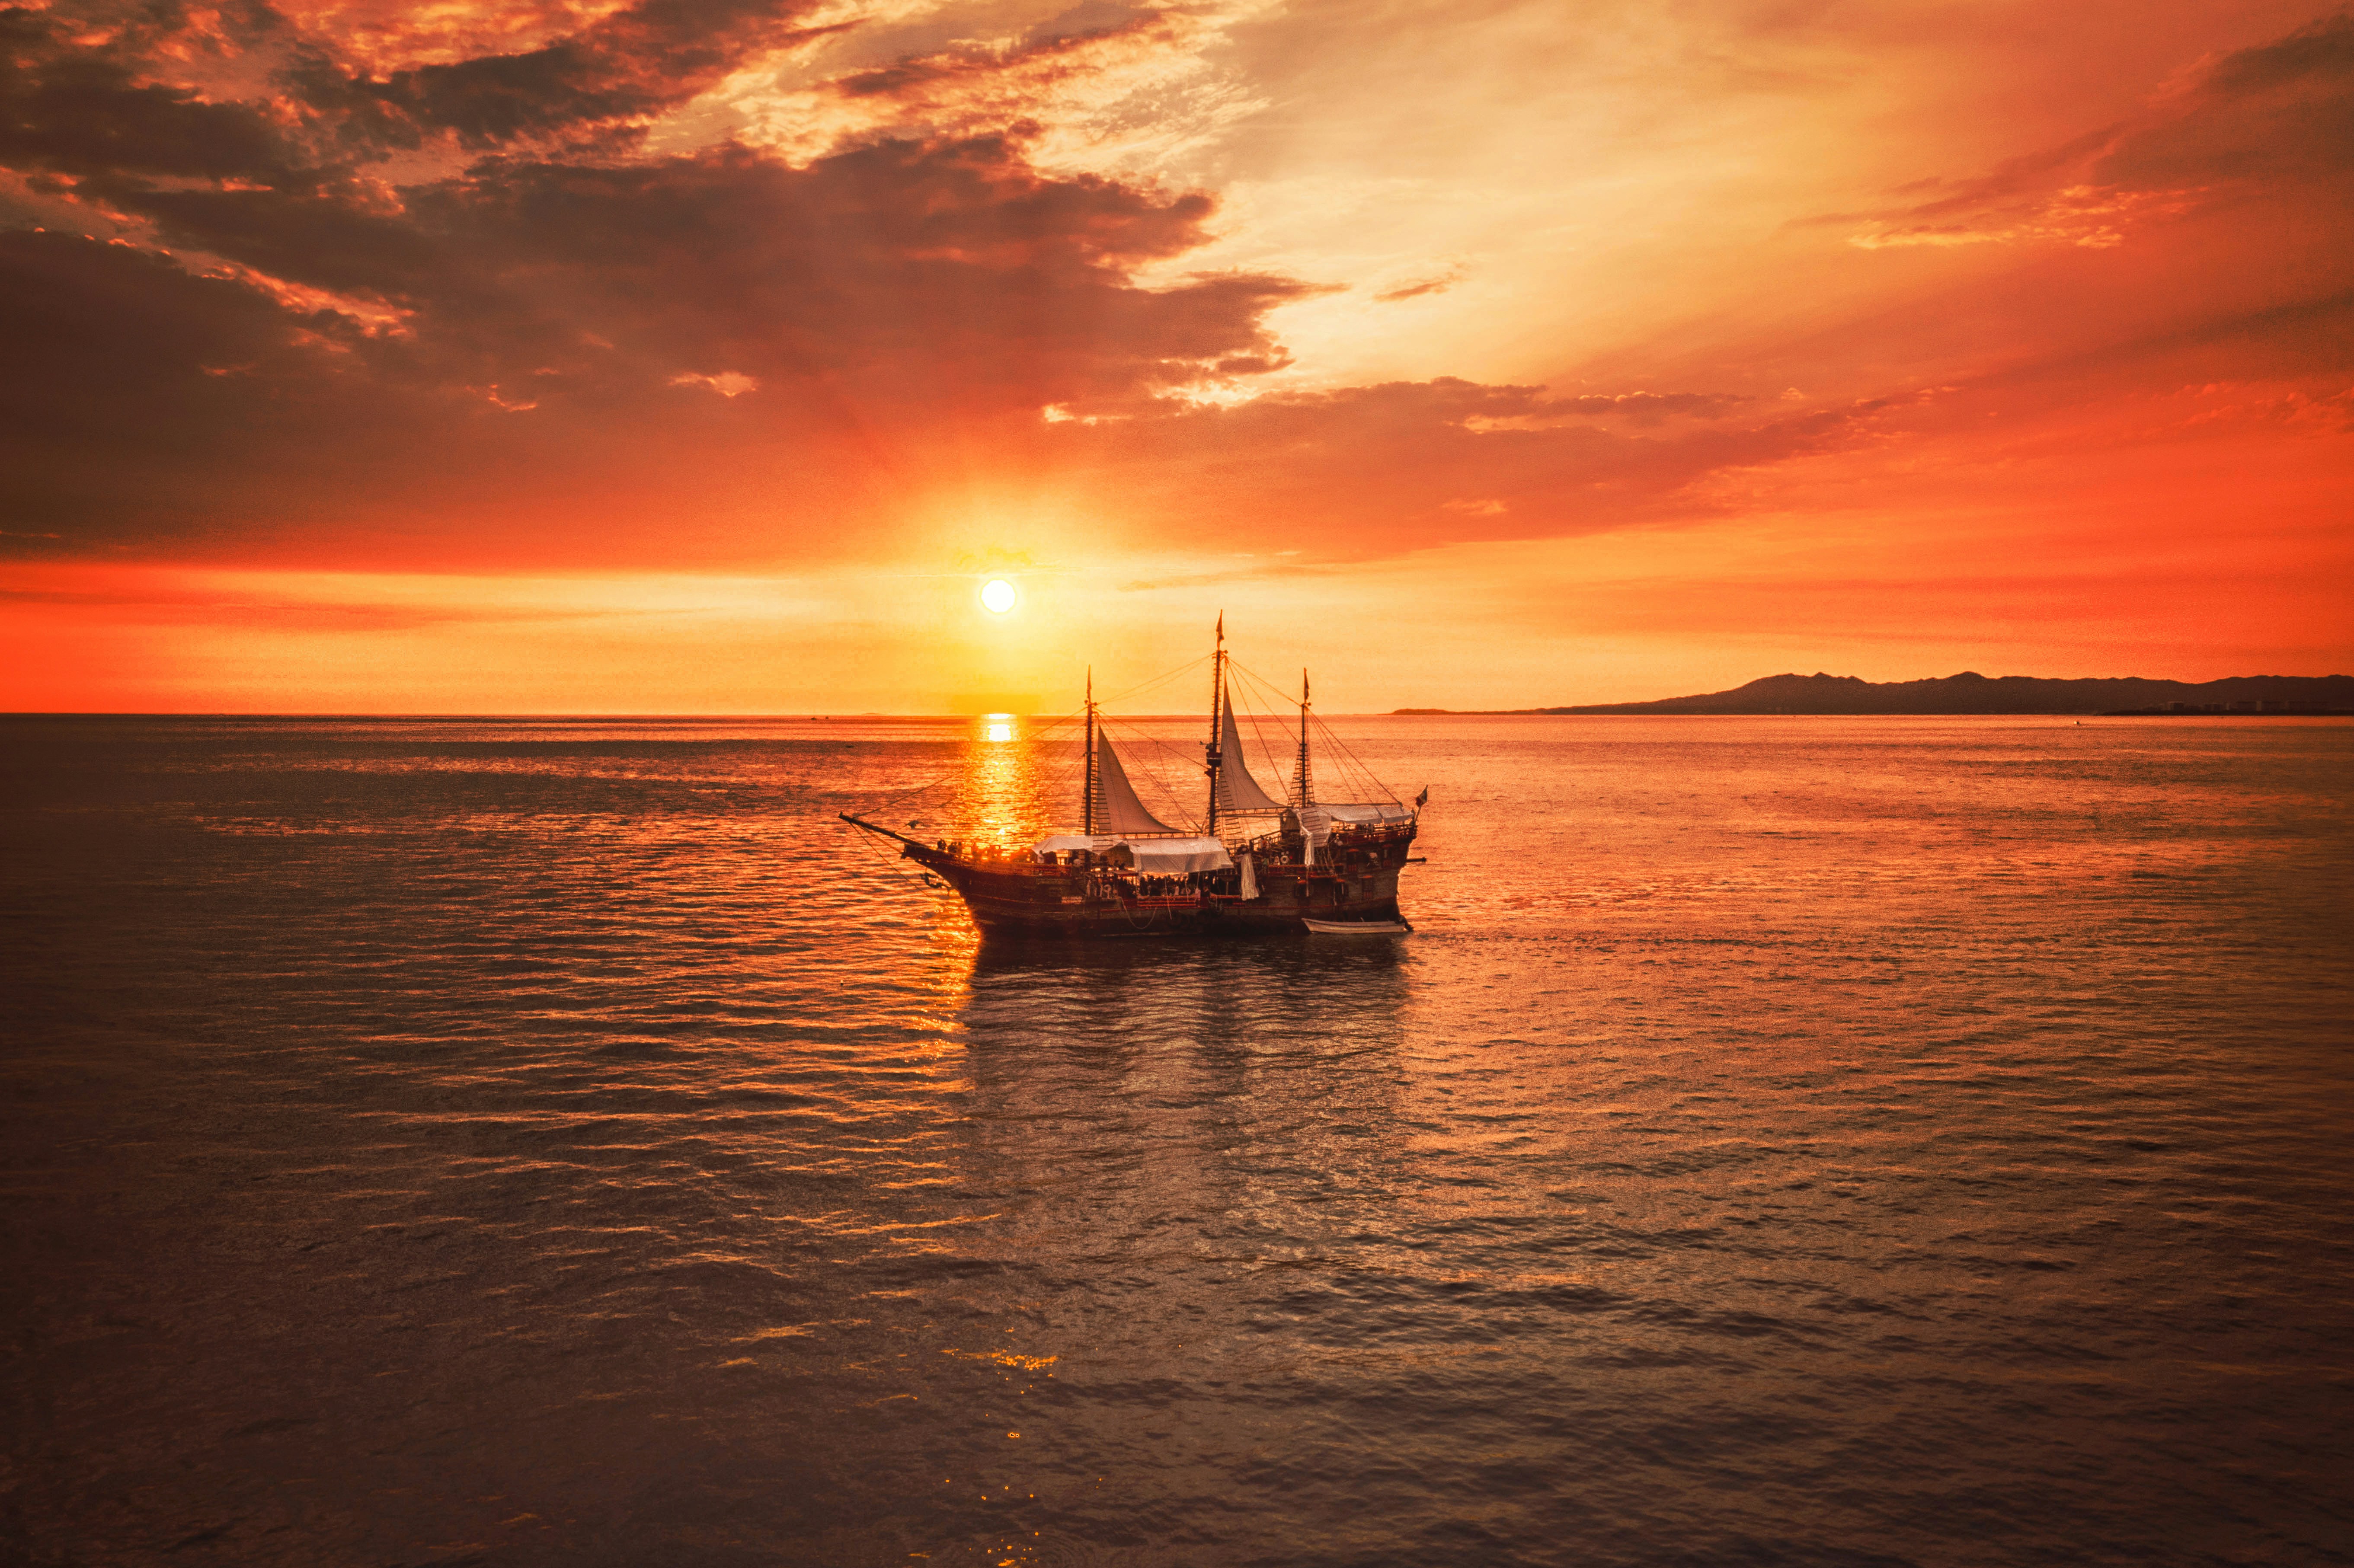 This is the most iconic pirate boat in Puerto Vallarta and I have the opportunity to shoot it on the sunset. I really hope you love it :)